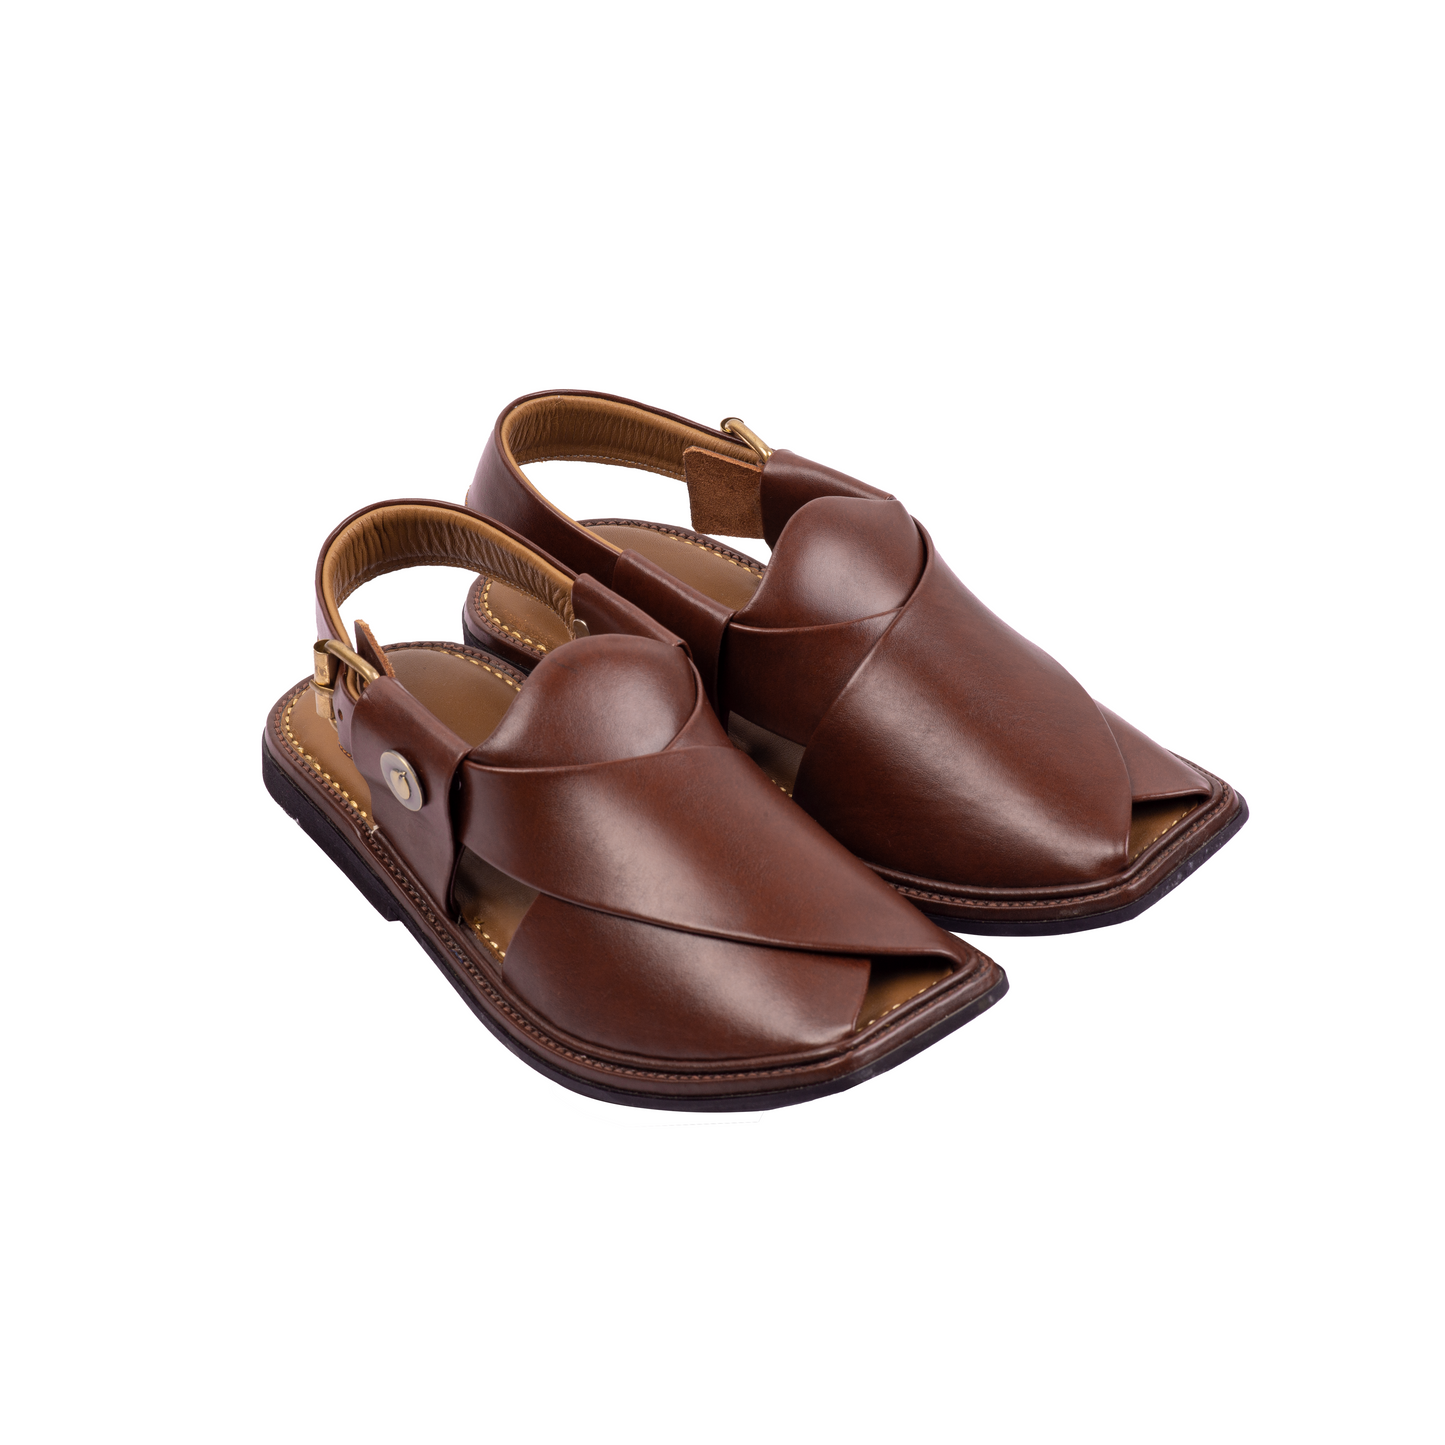 Royal style special design Burgundy Traditional leather chappal-BERA